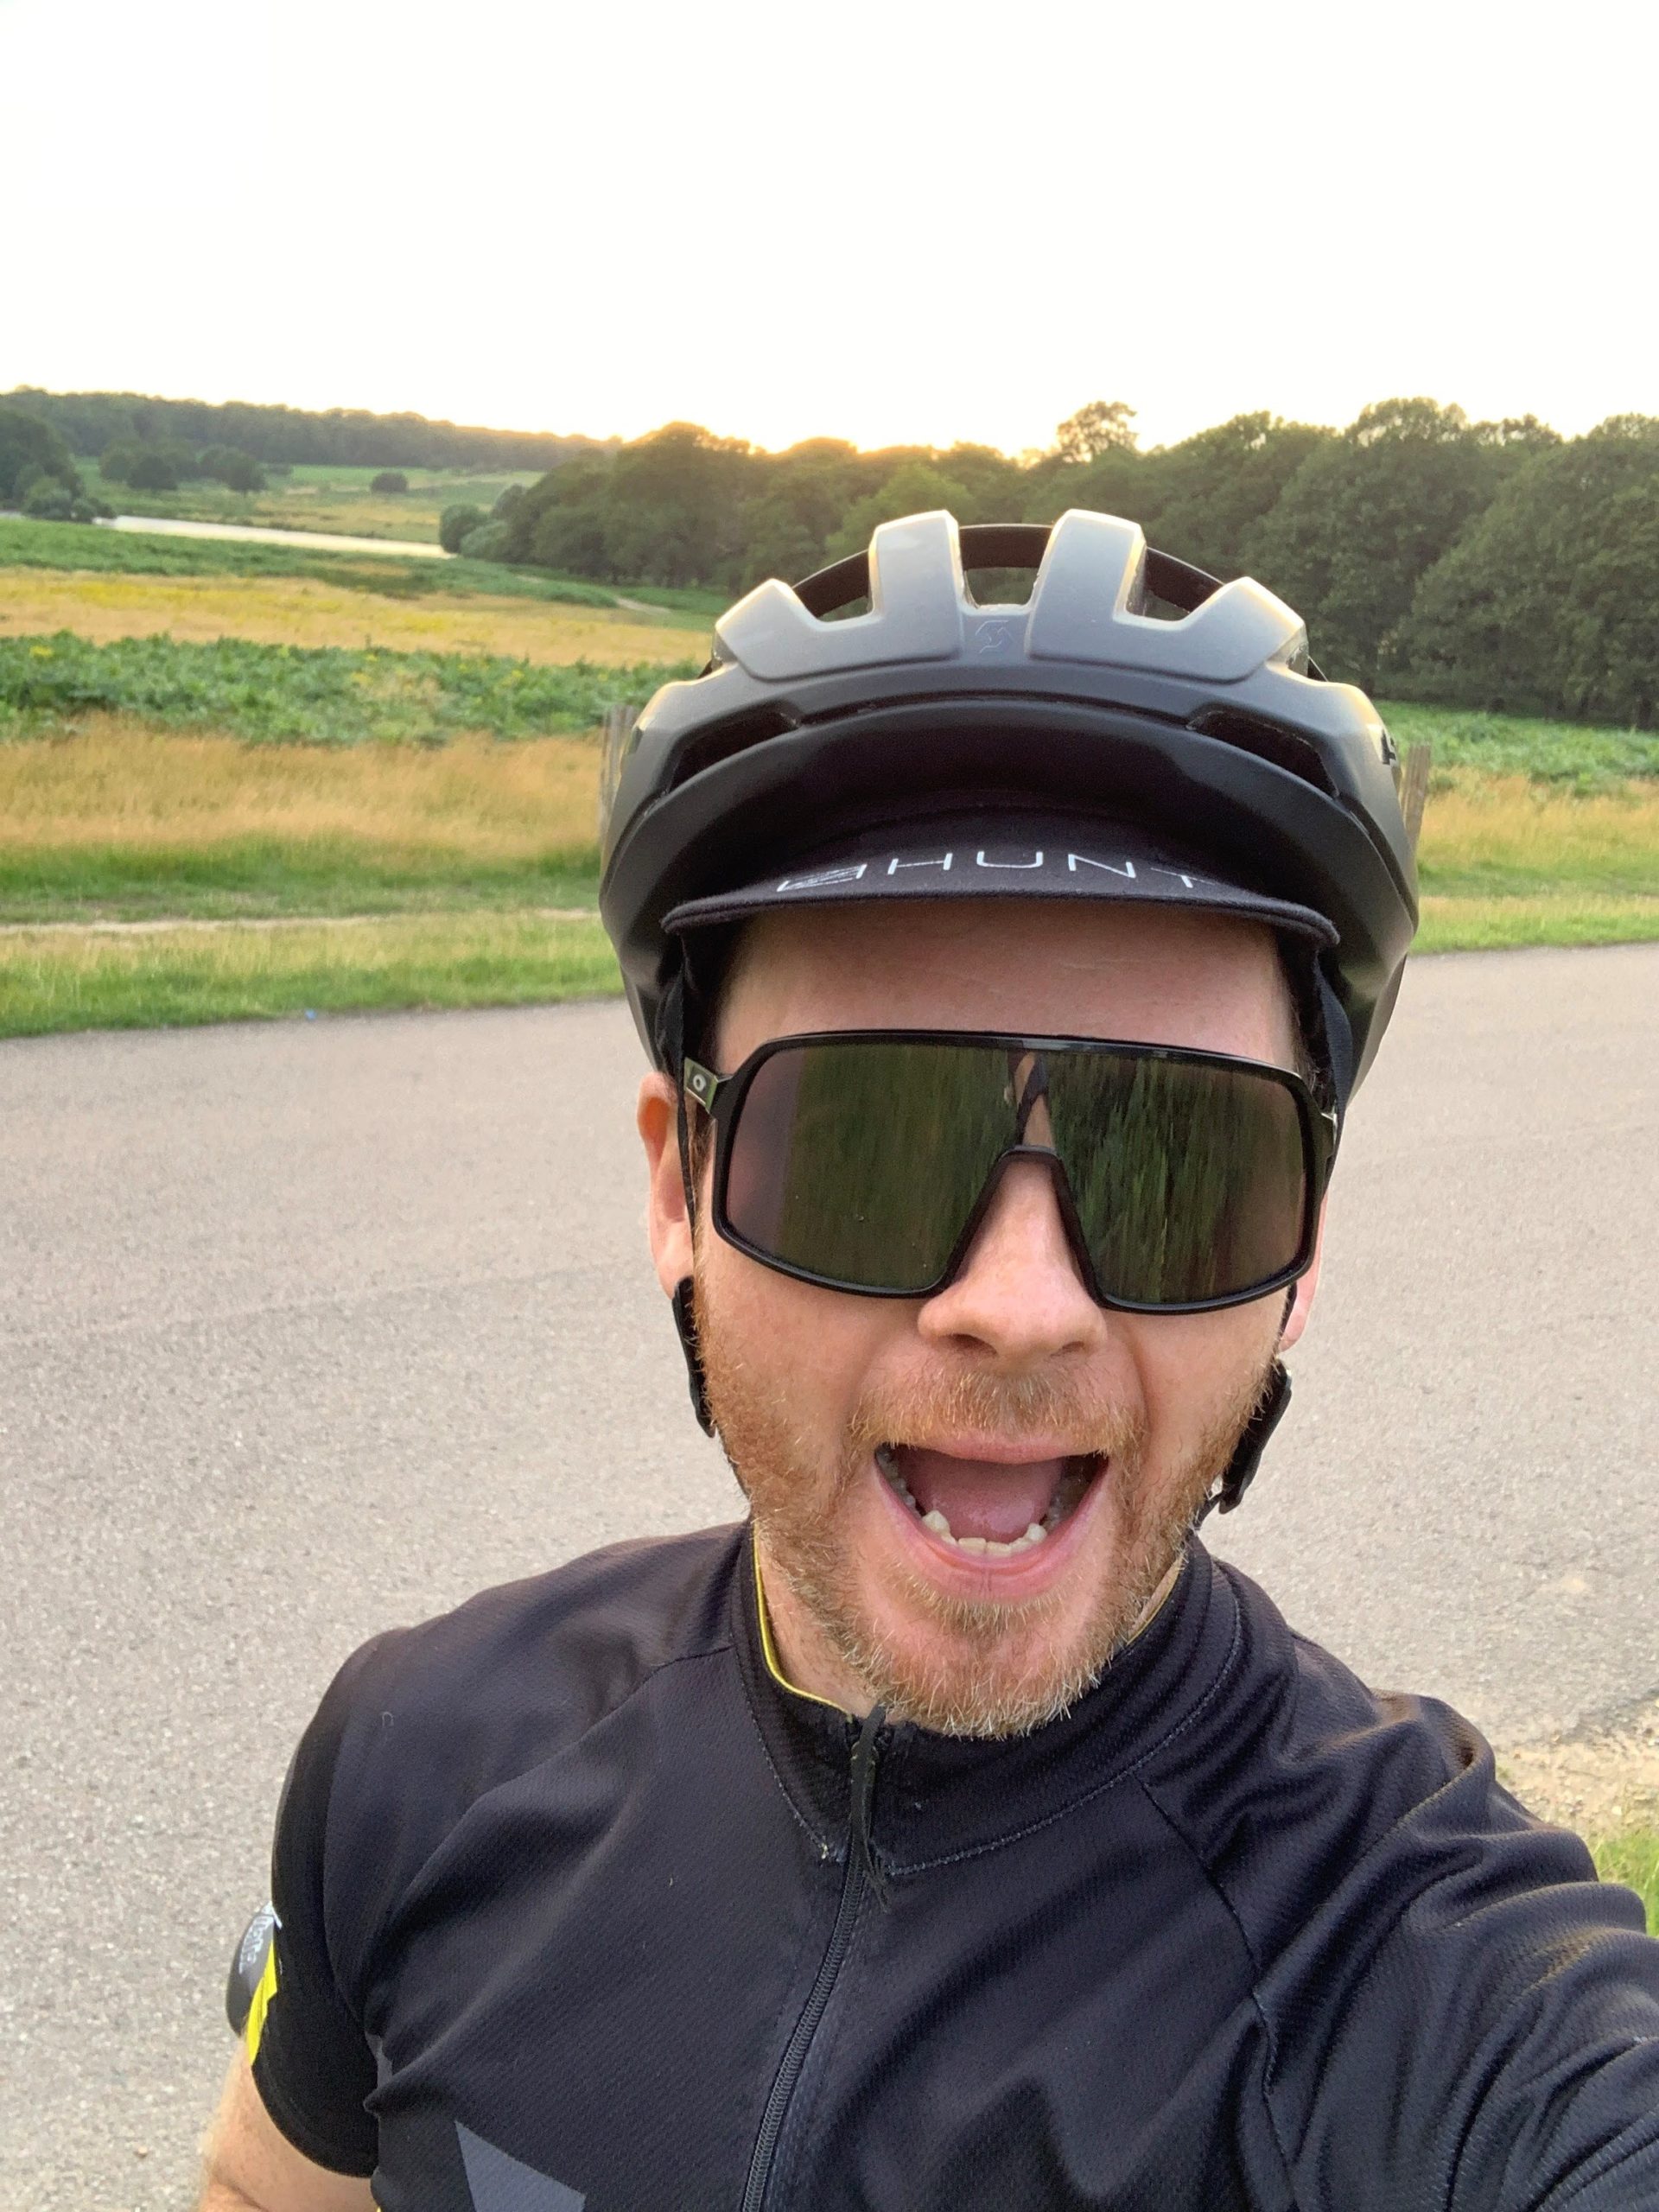 Cycling the length of the UK in memory of Dad